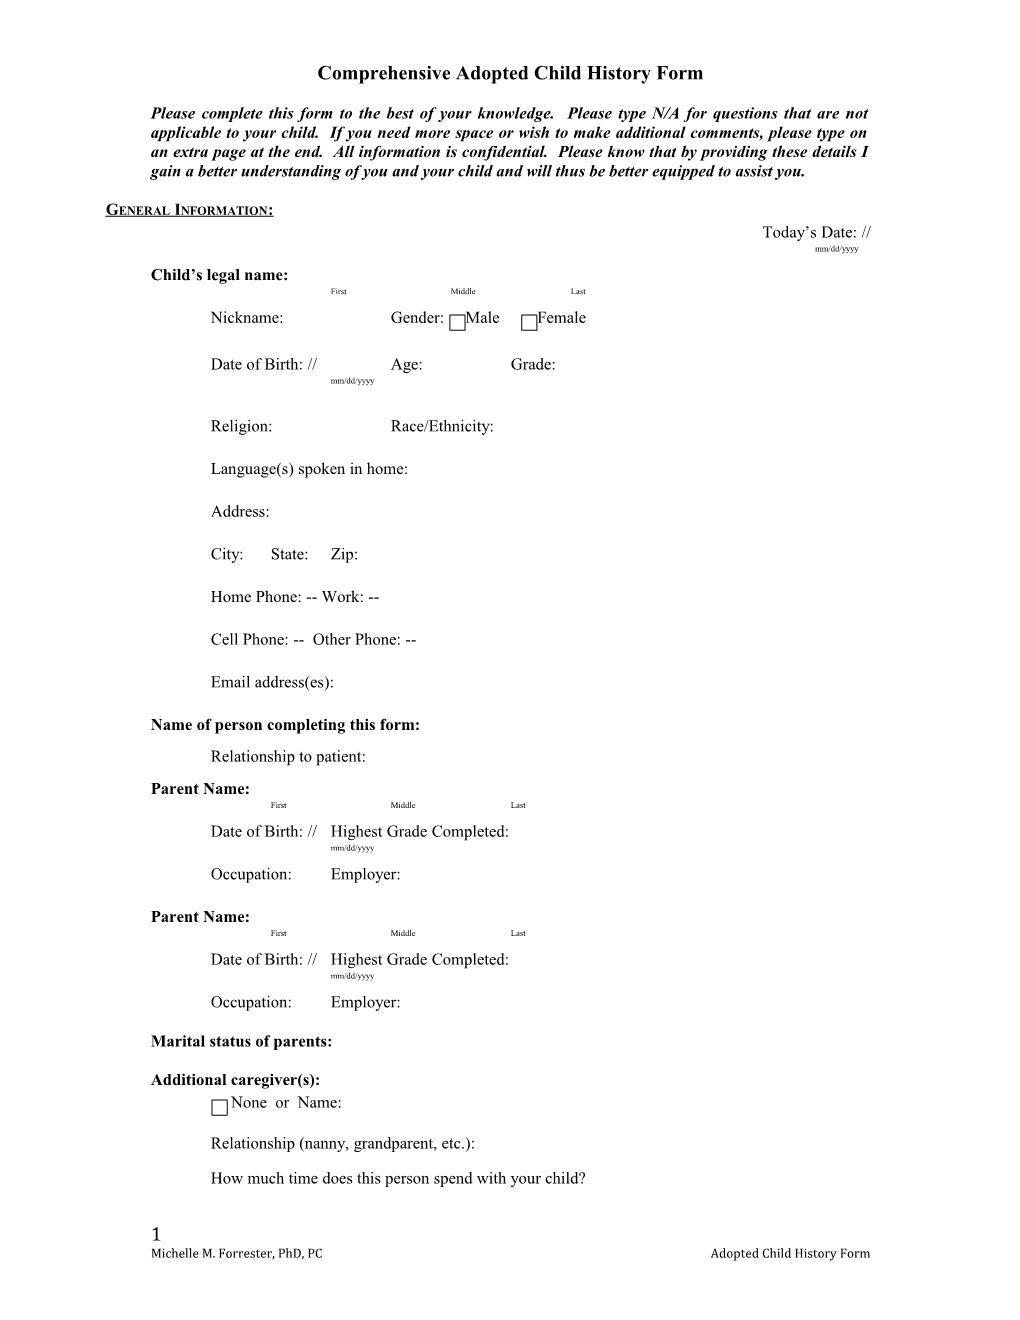 Comprehensive Adopted Child History Form